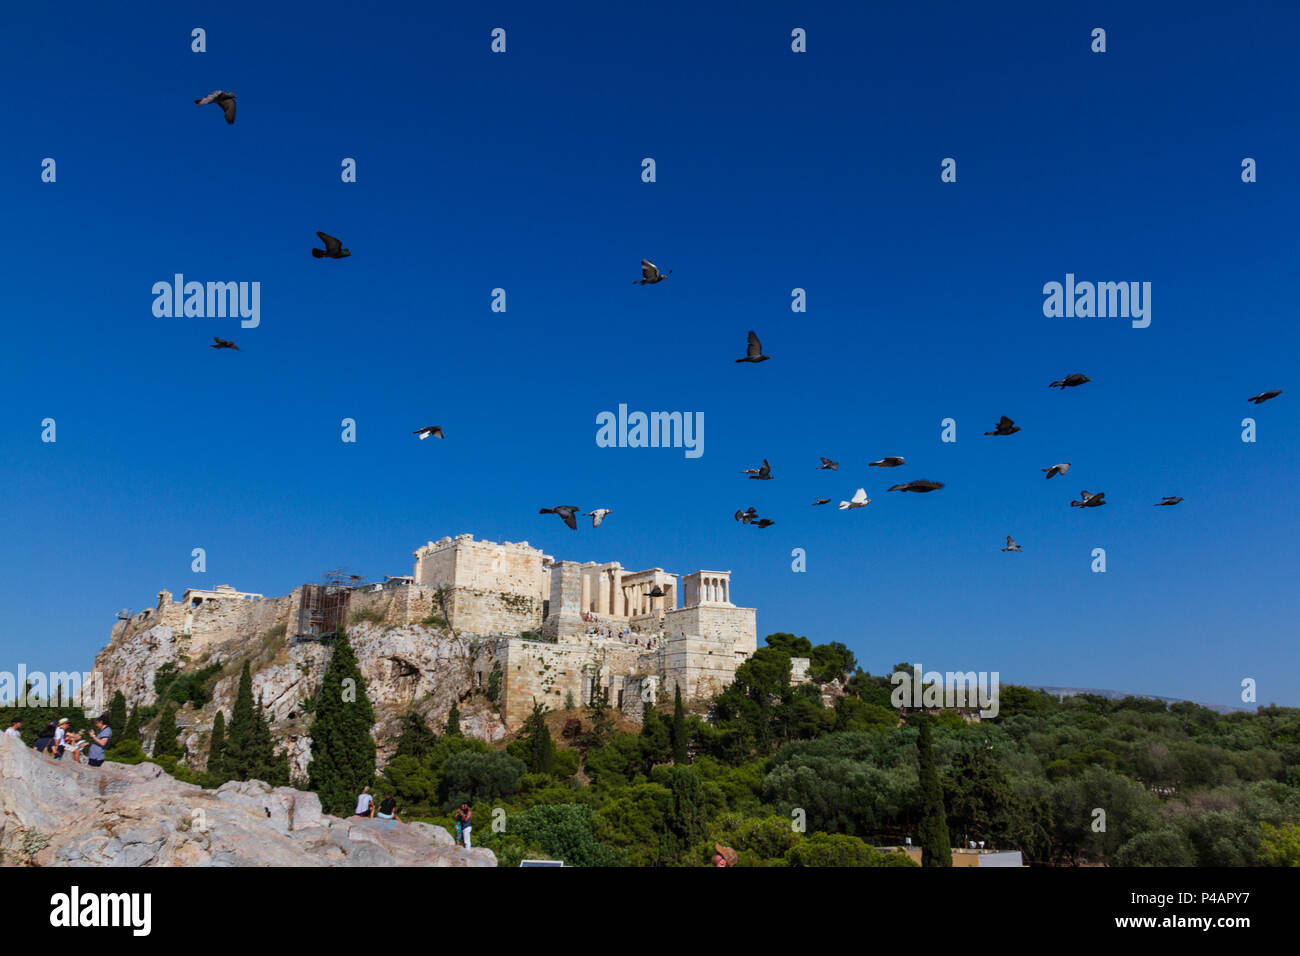 Athens, Greece - June 9, 2018: Scenic view of the rock of the Acropolis of Athens in Greece with flying pigeons and gazing tourists in the foreground Stock Photo